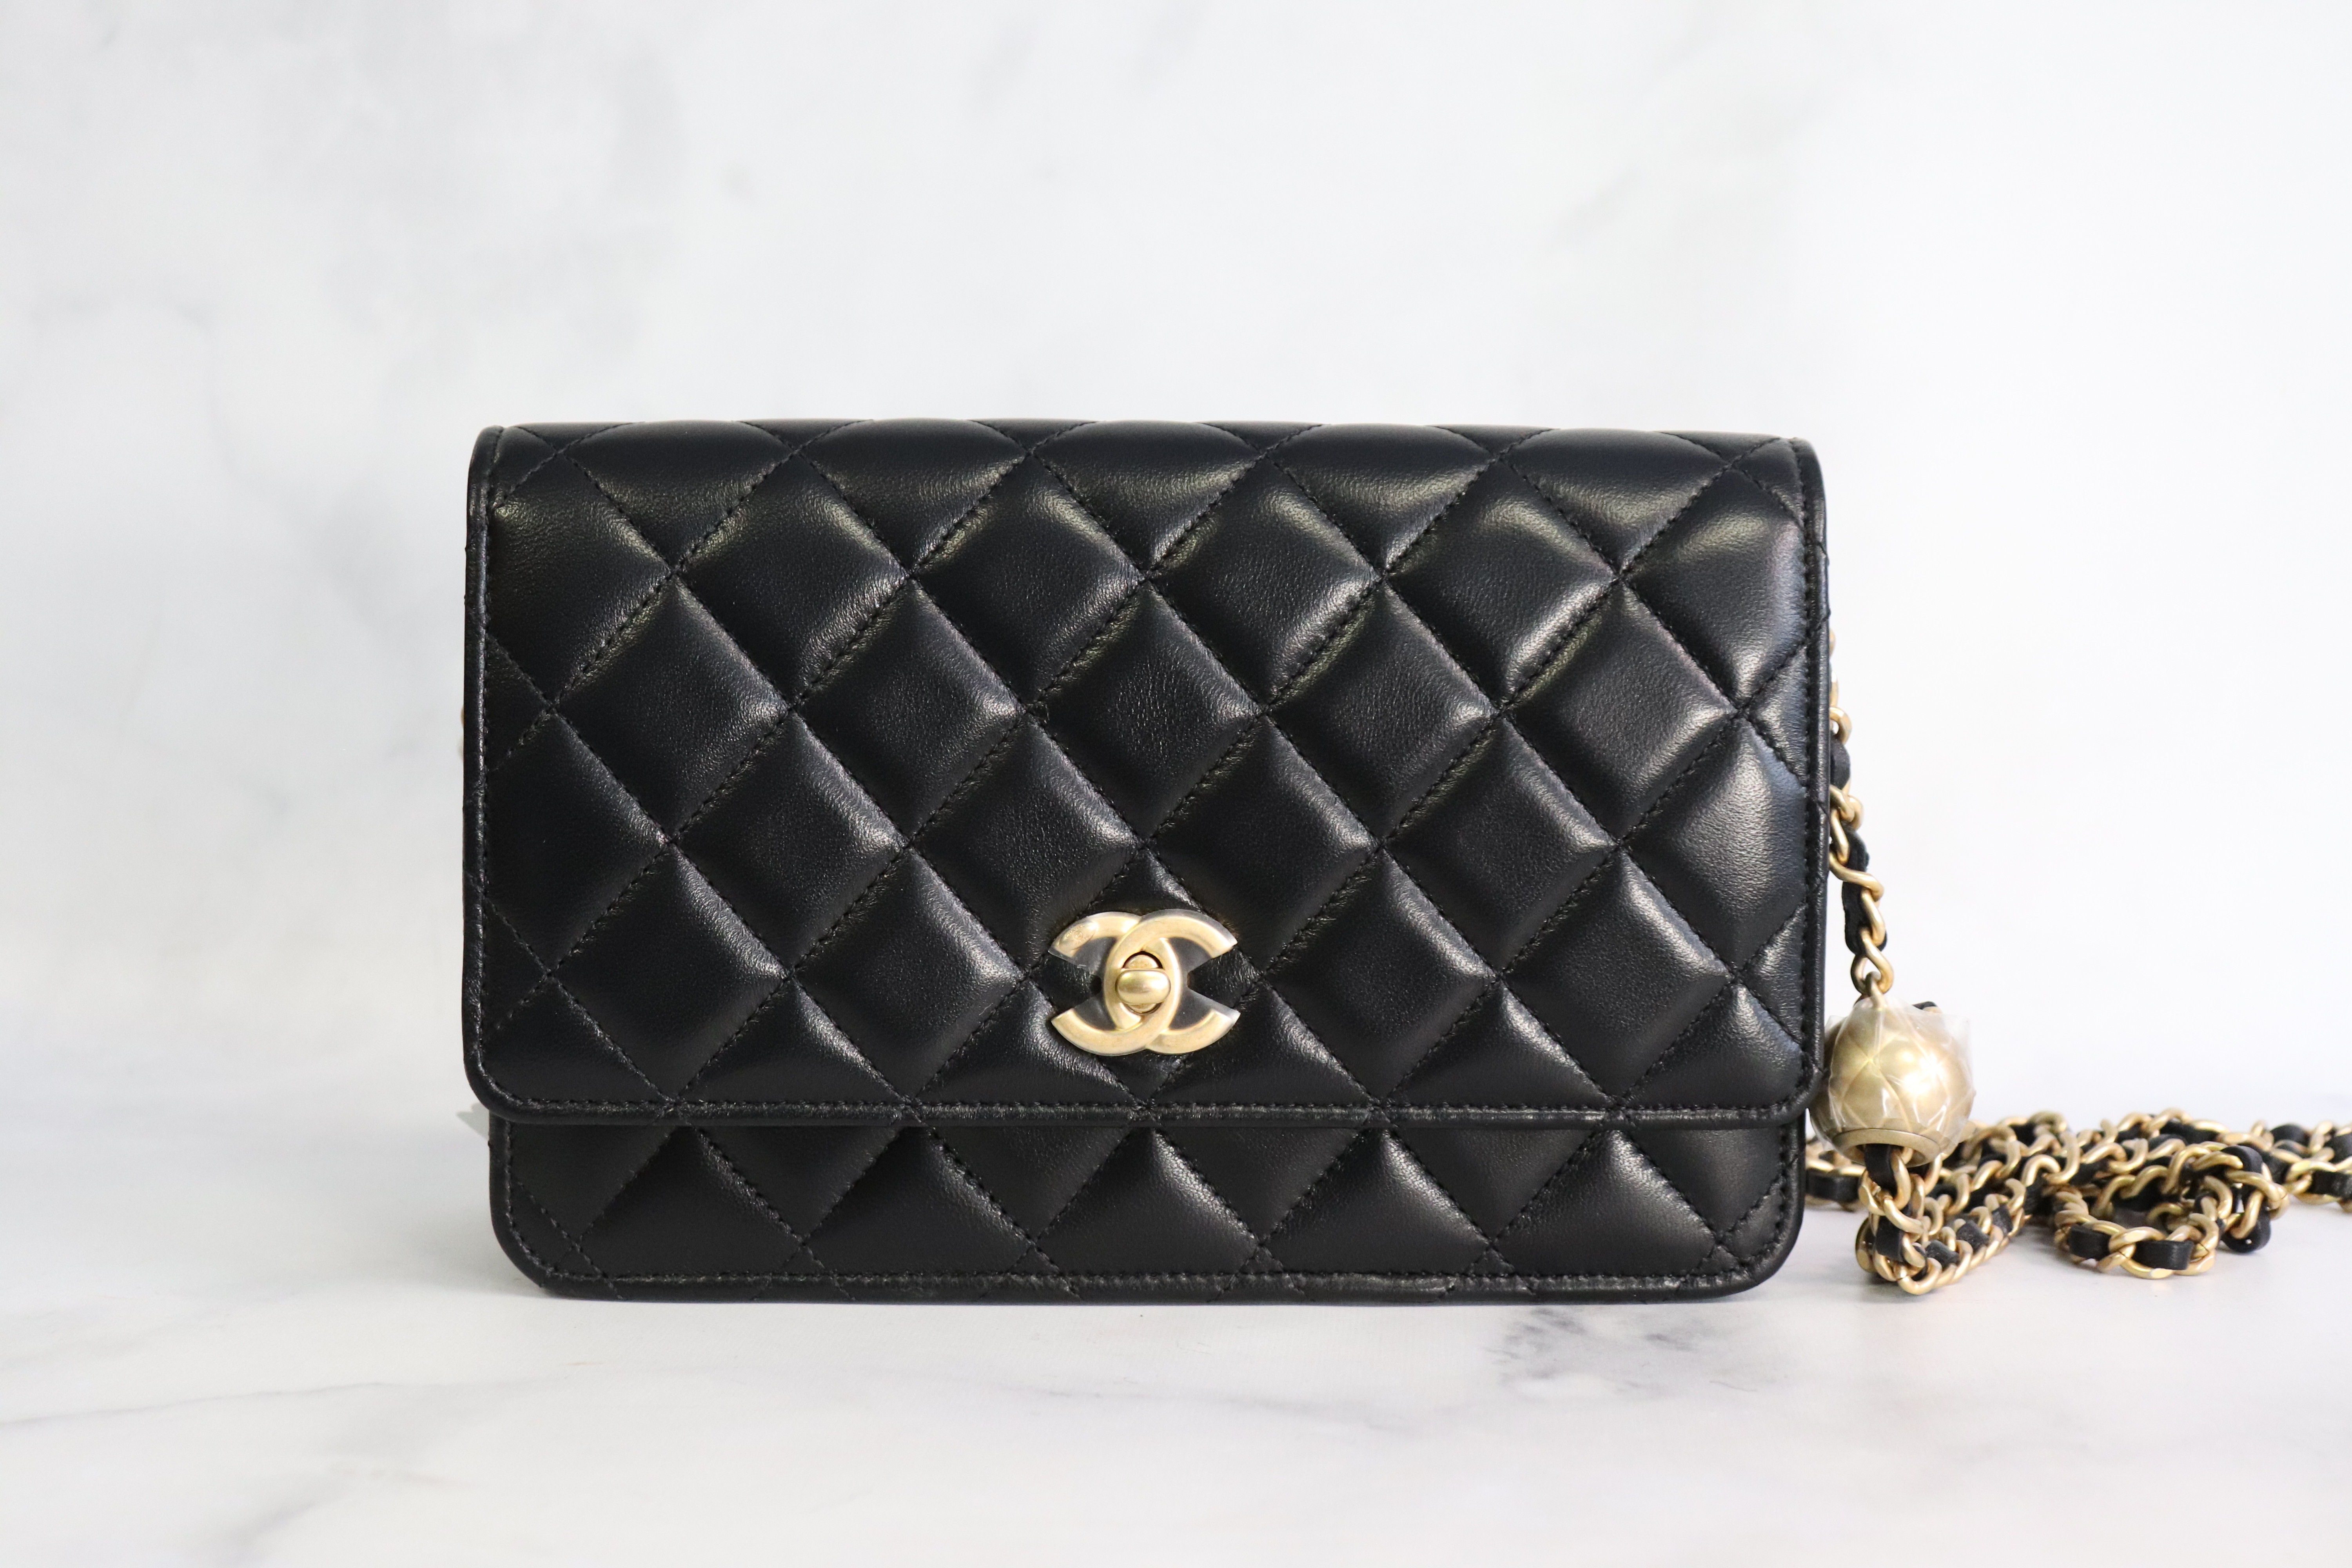 New Chanel Denim Pearl crush with gold hardware GHW mini Wallet on chain  Pearlcrush 22C crossbody